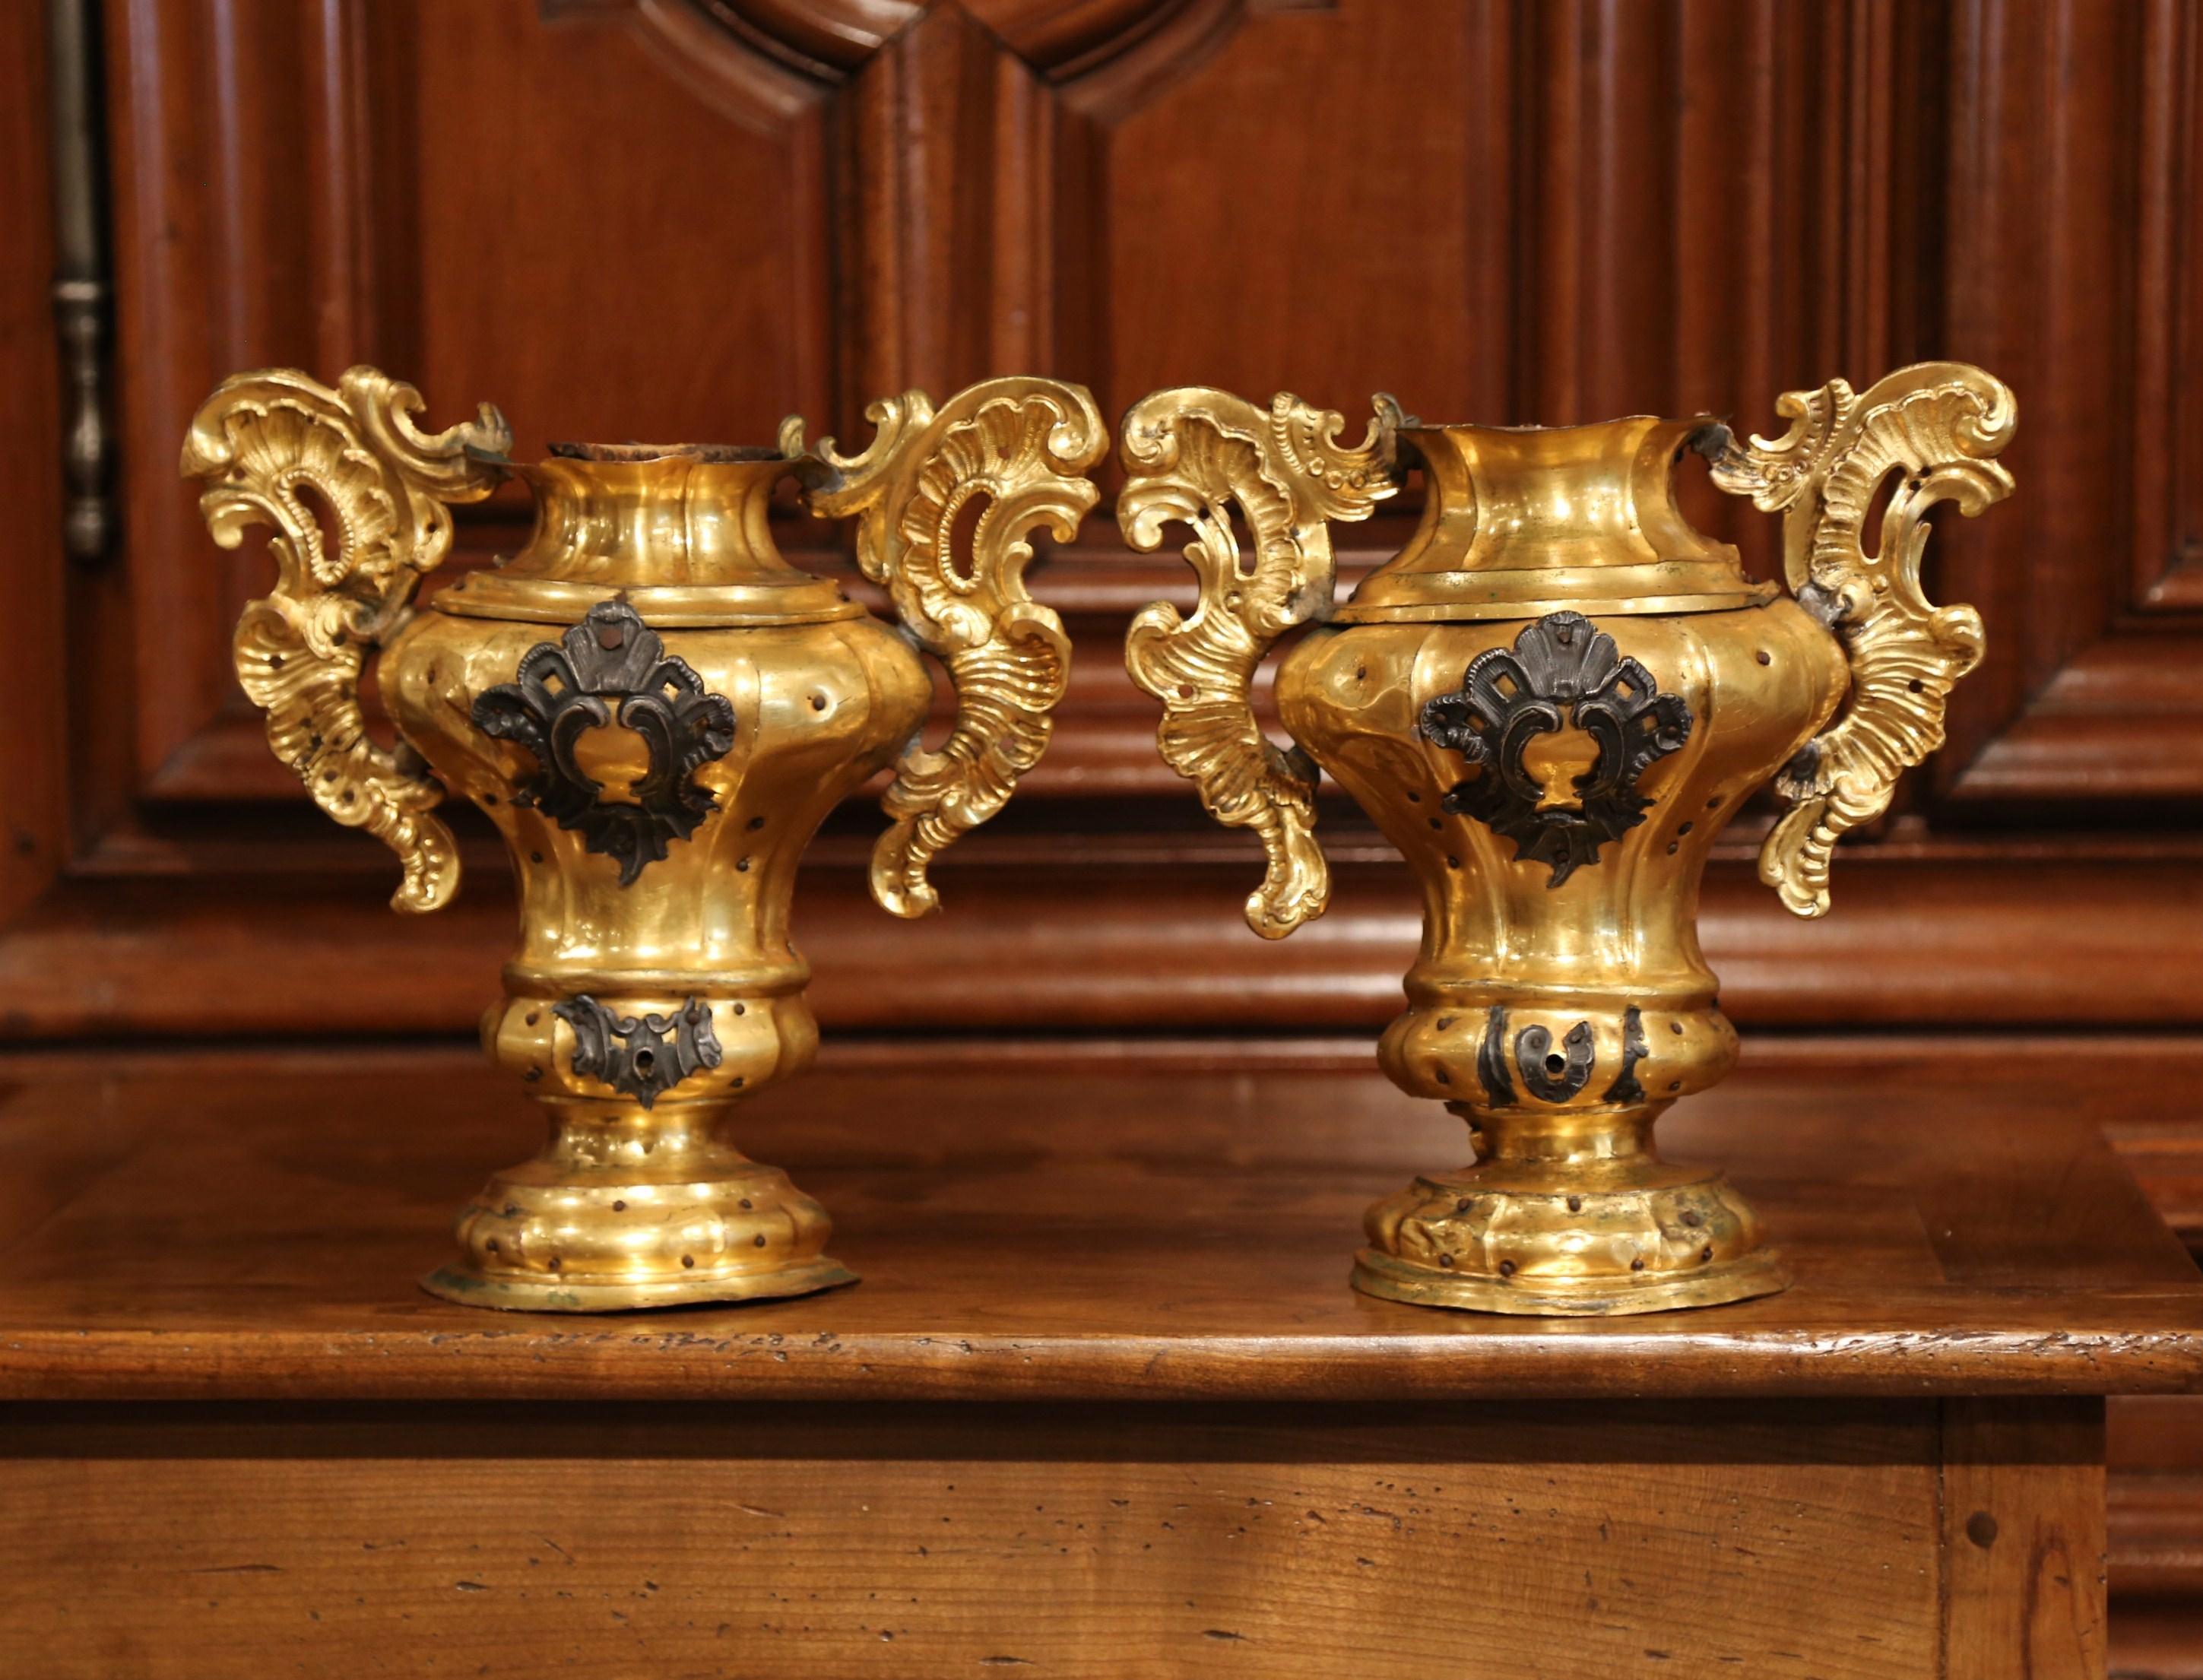 Hand-Carved Pair of 18th Century Italian Carved Giltwood and Brass Altar Ornament Vessels